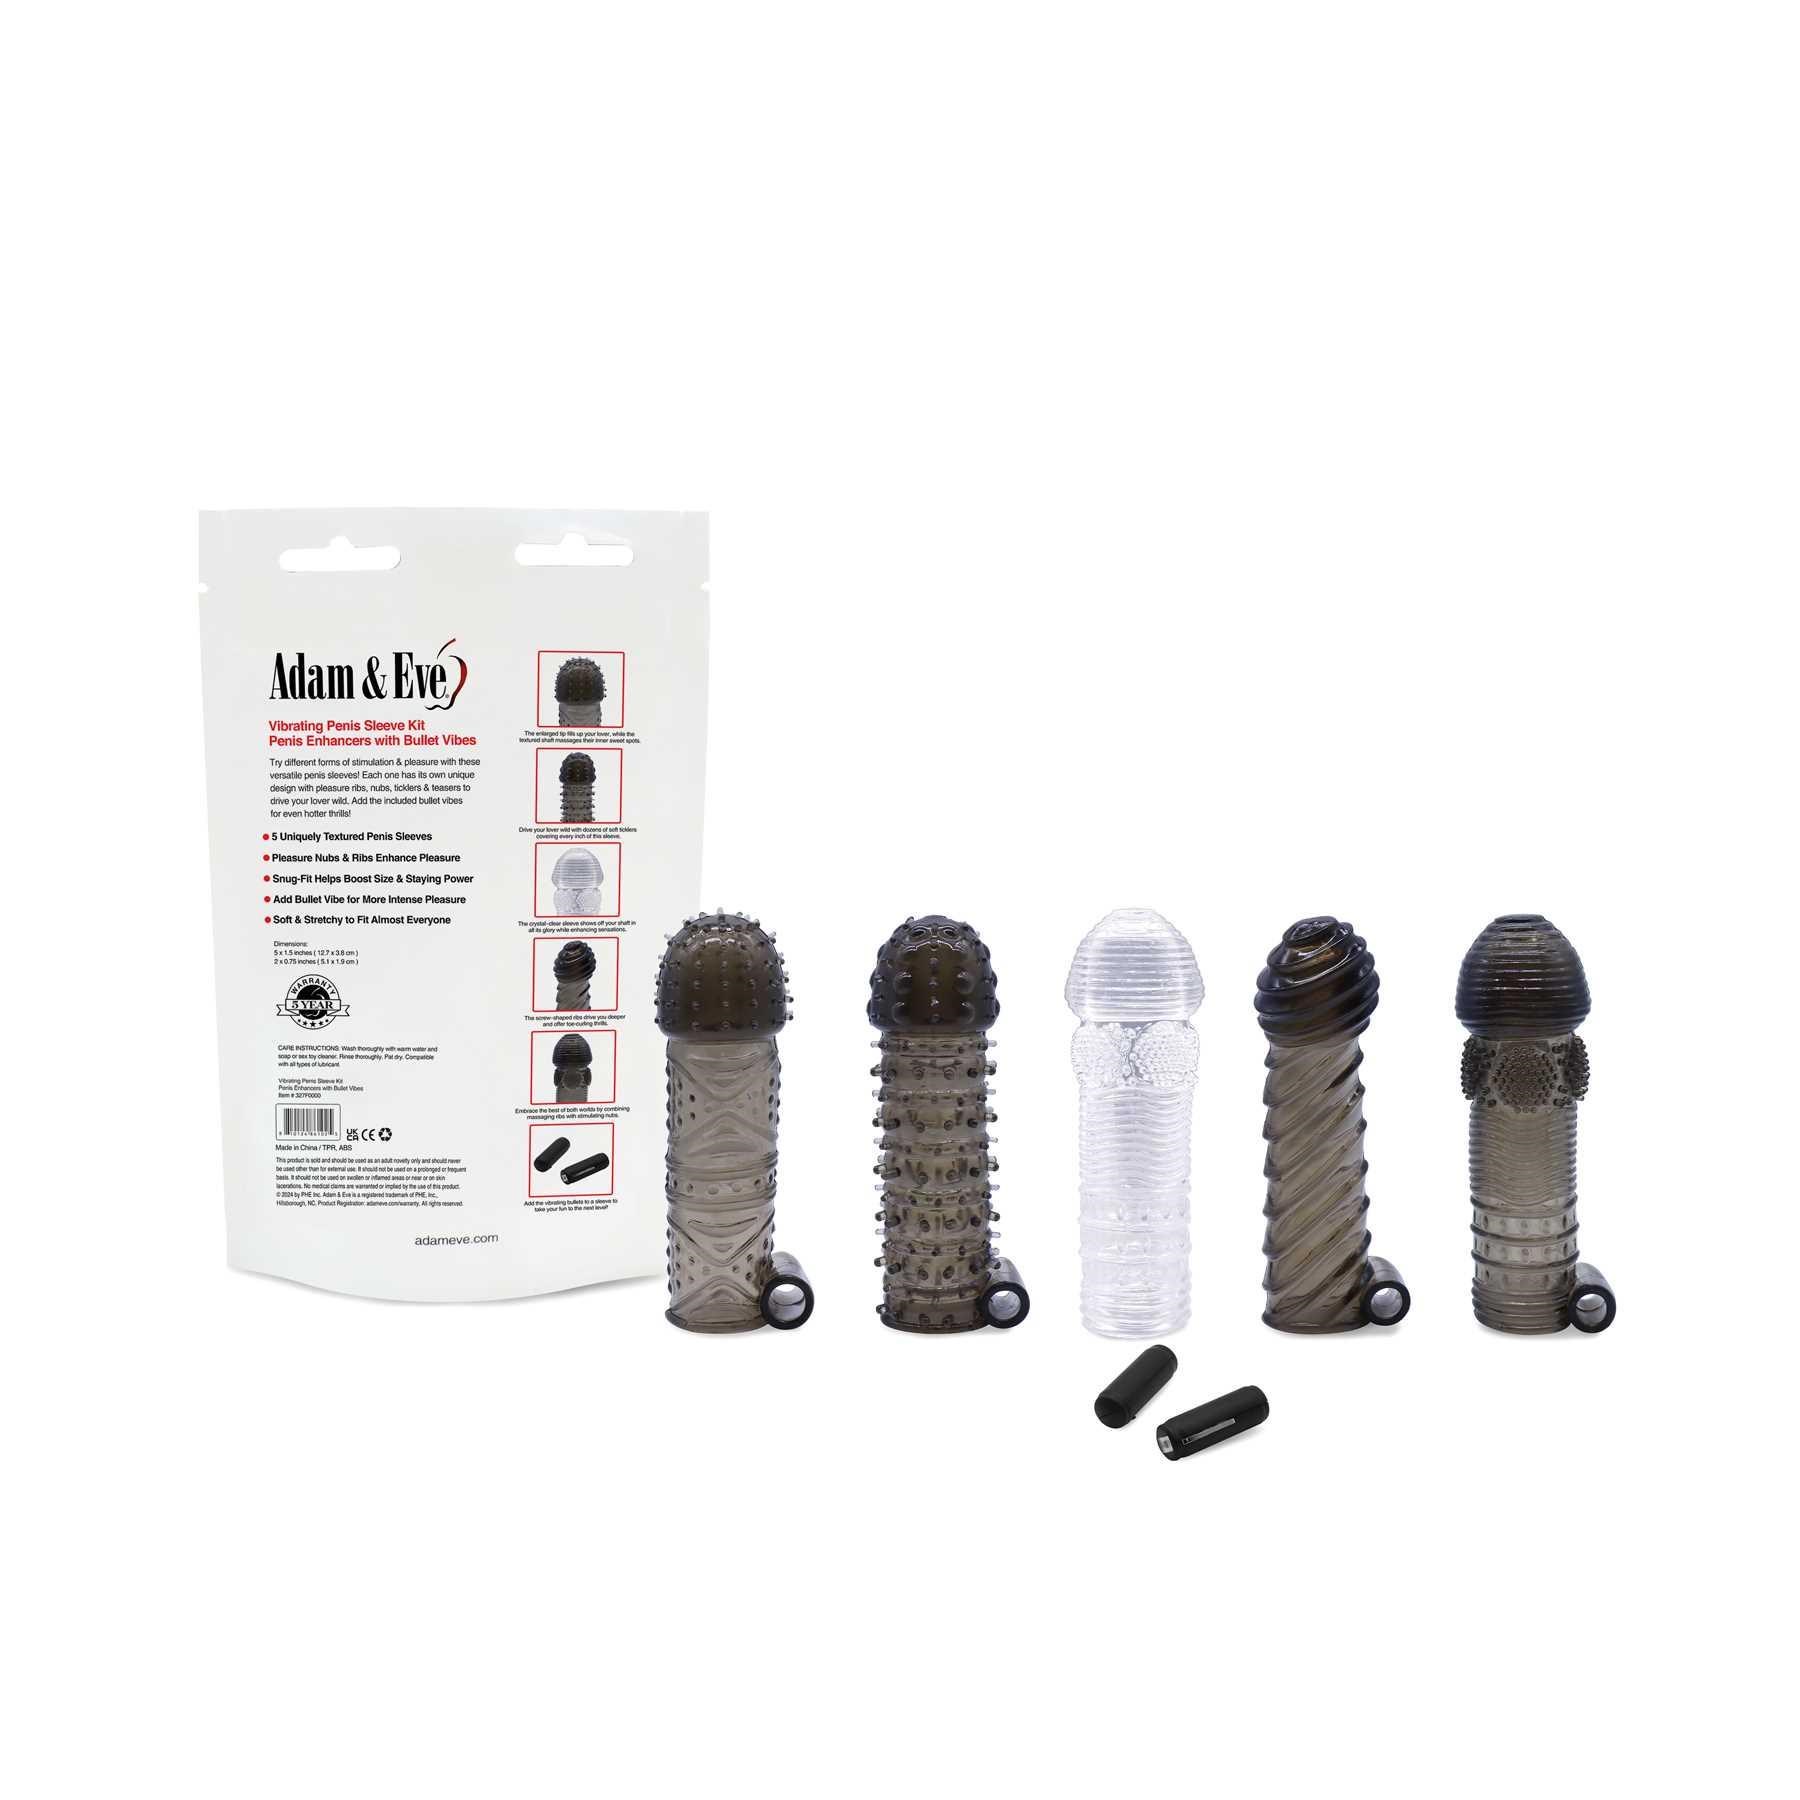 ADAM AND EVE VIBRATING PENIS SLEEVE KIT with back of box